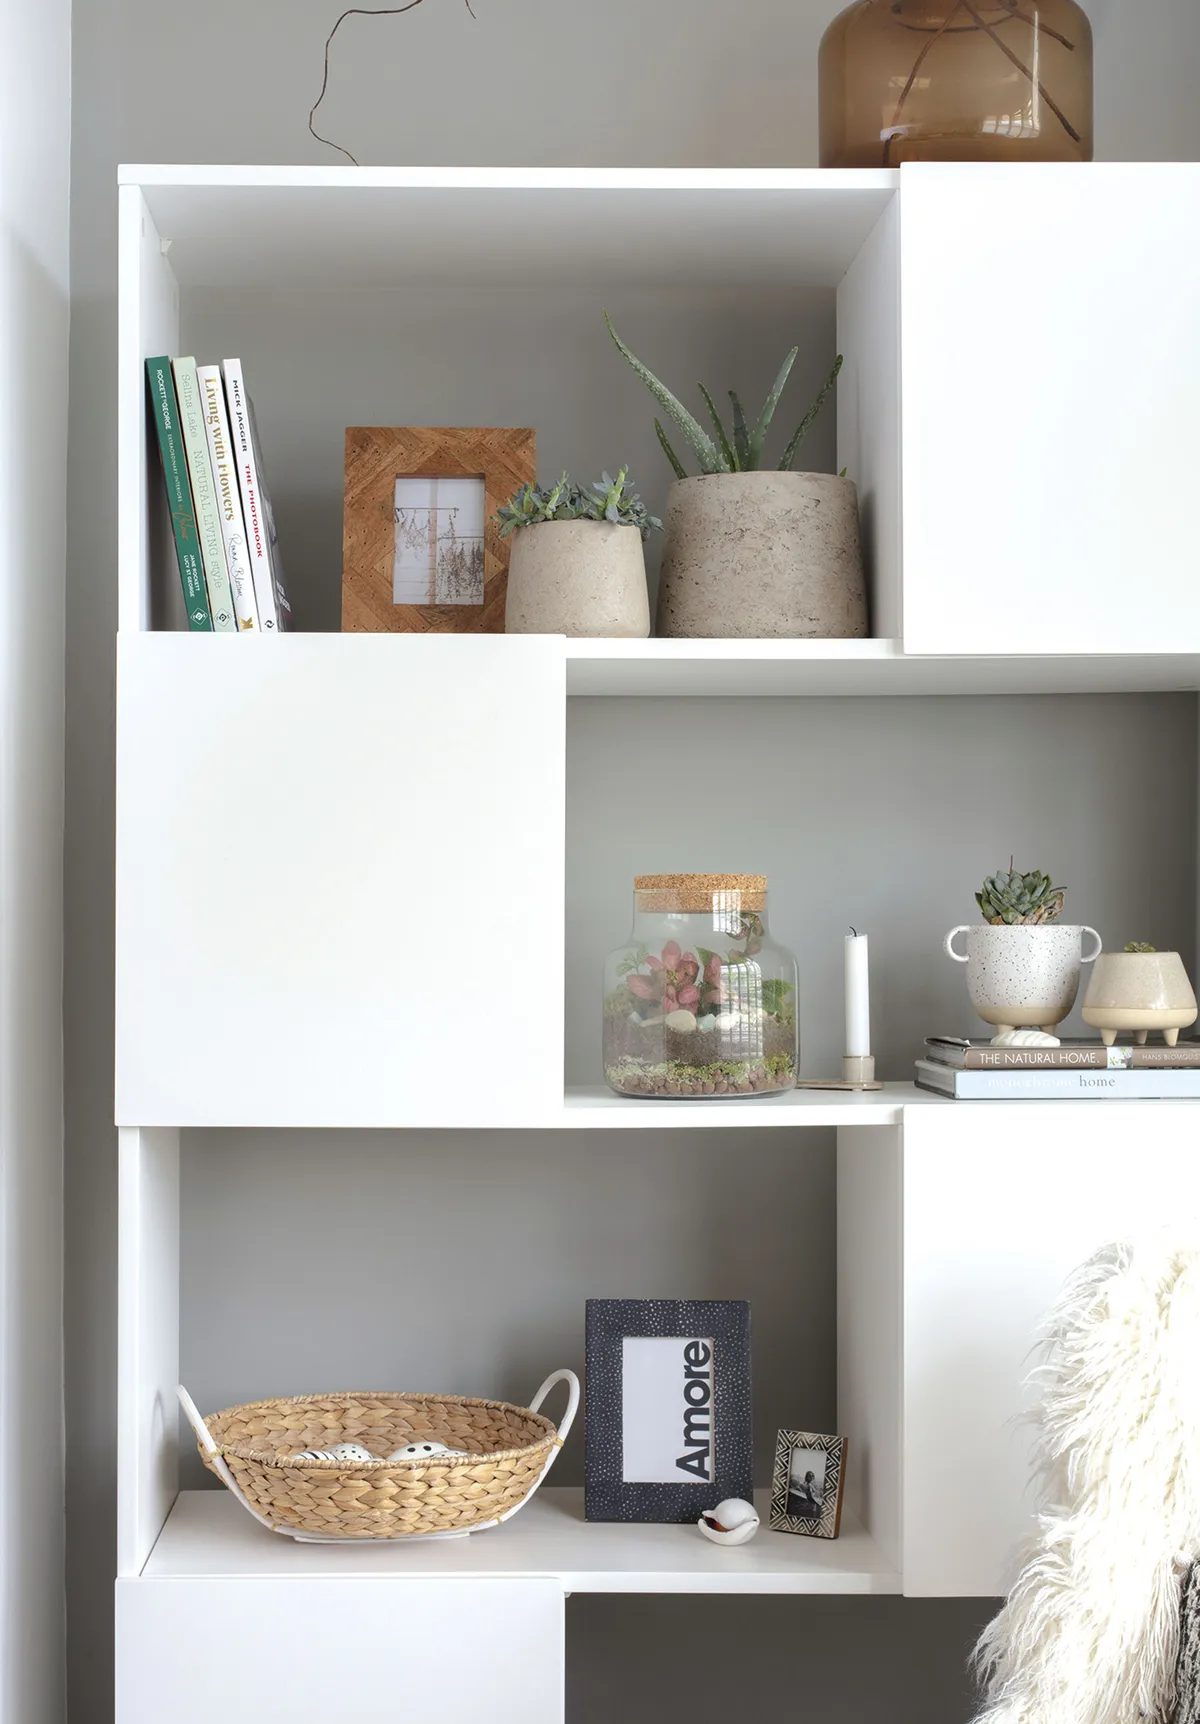 The Arctic bookcase from Maisons du Monde fits in with the Scandi scheme and provides extra space for Yoko to display plants, books and treasured finds